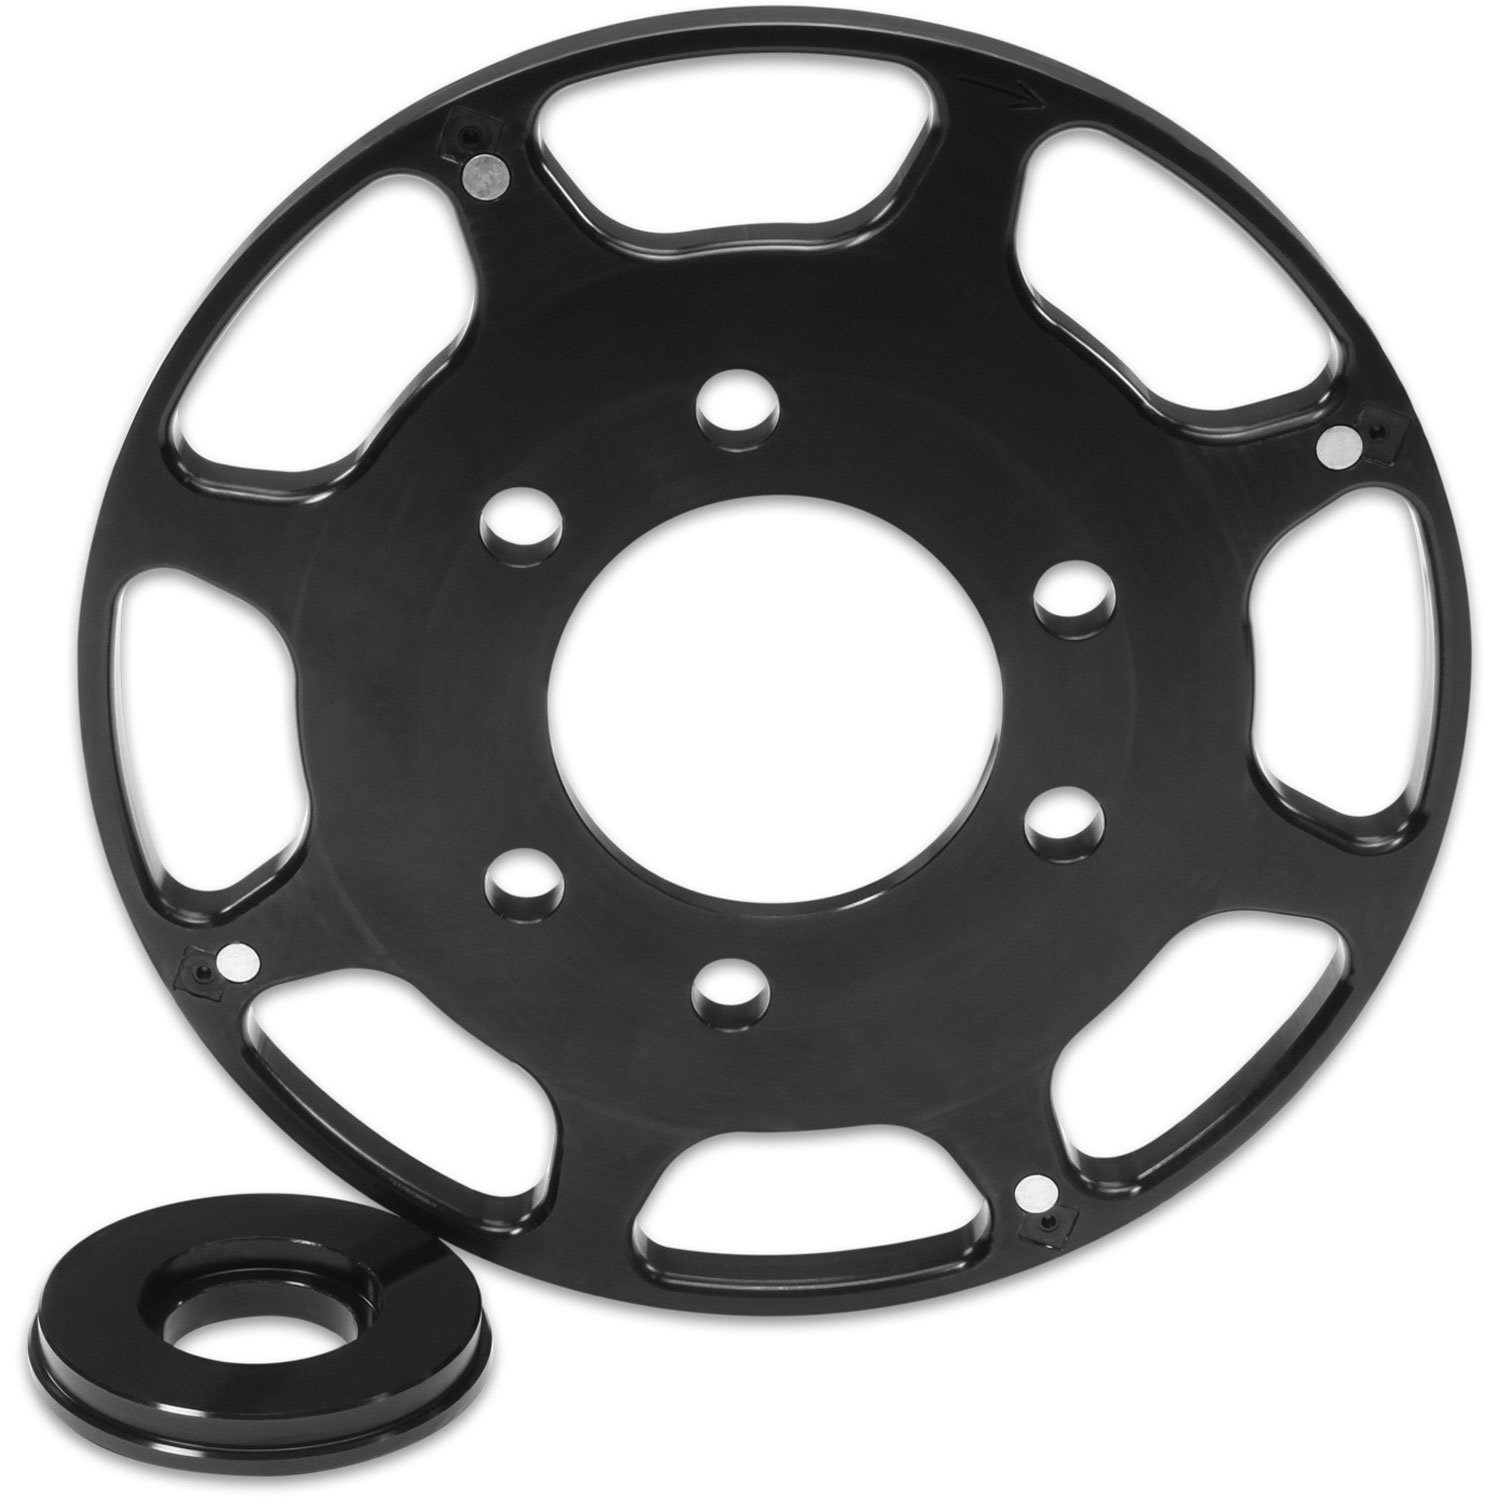 Replacement Crank Trigger Wheel Small Block Chevy 7"